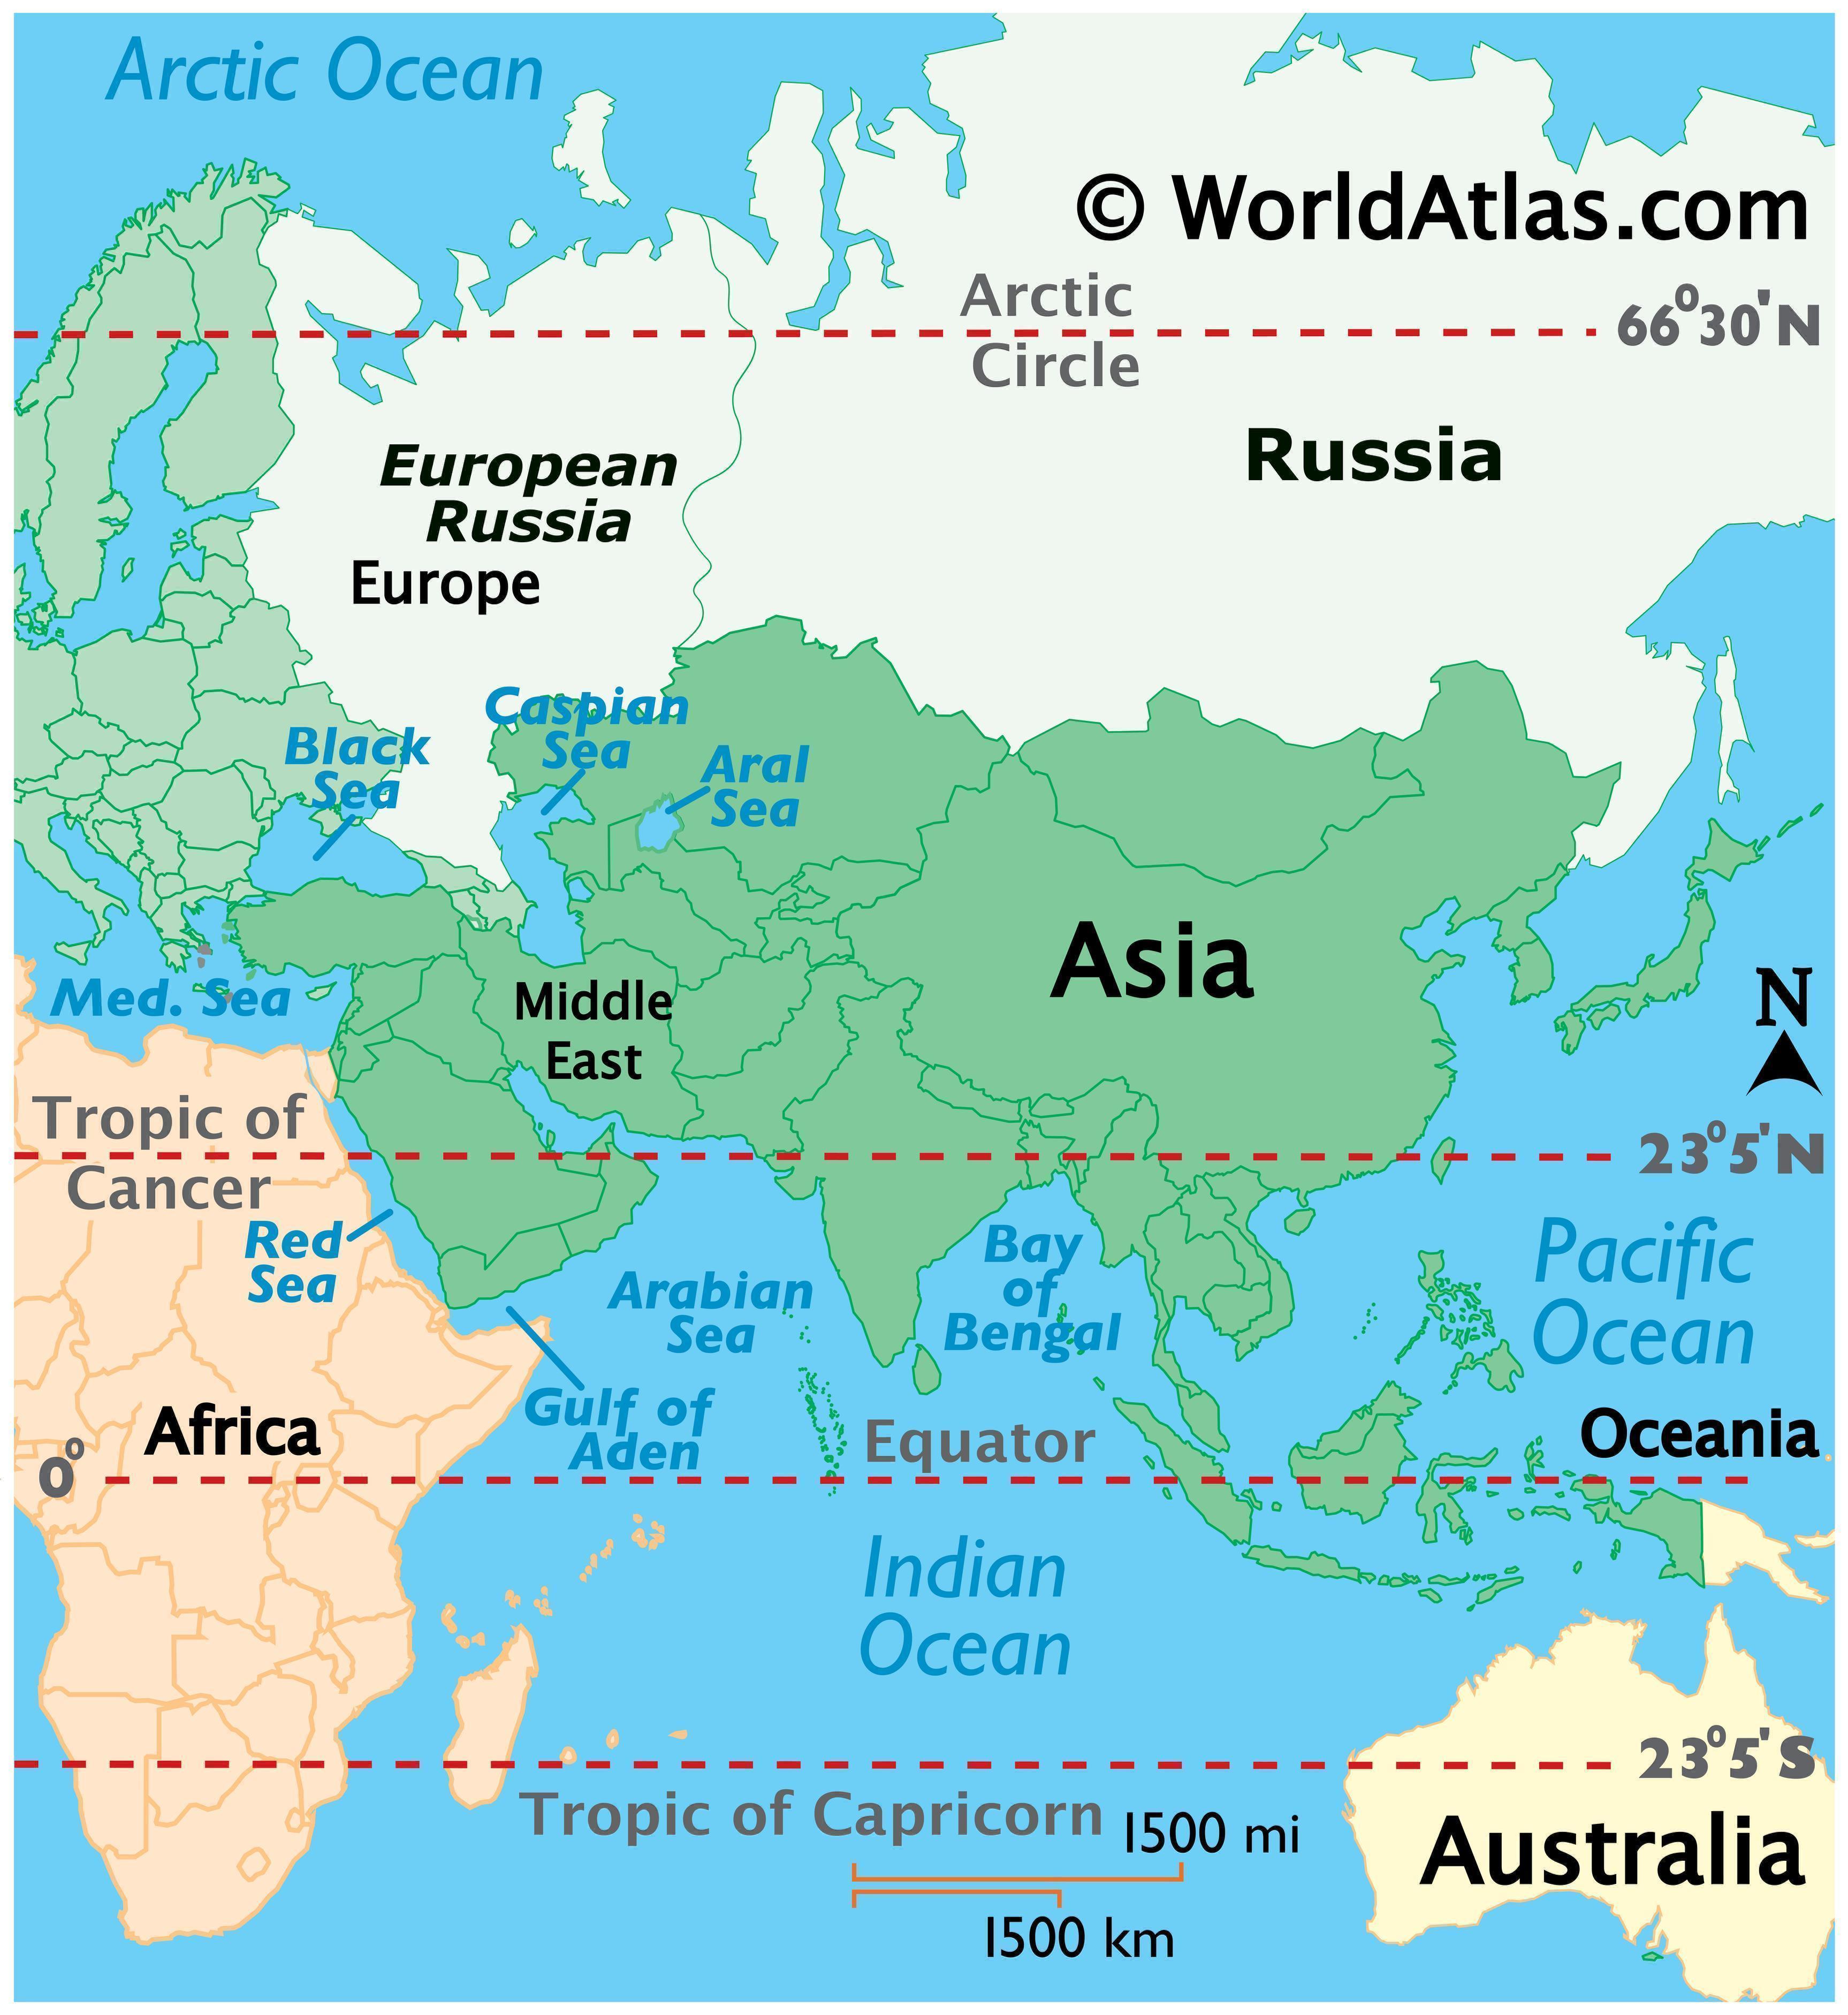 Russia Map / Geography of Russia / Map of Russia - Worldatlas.com